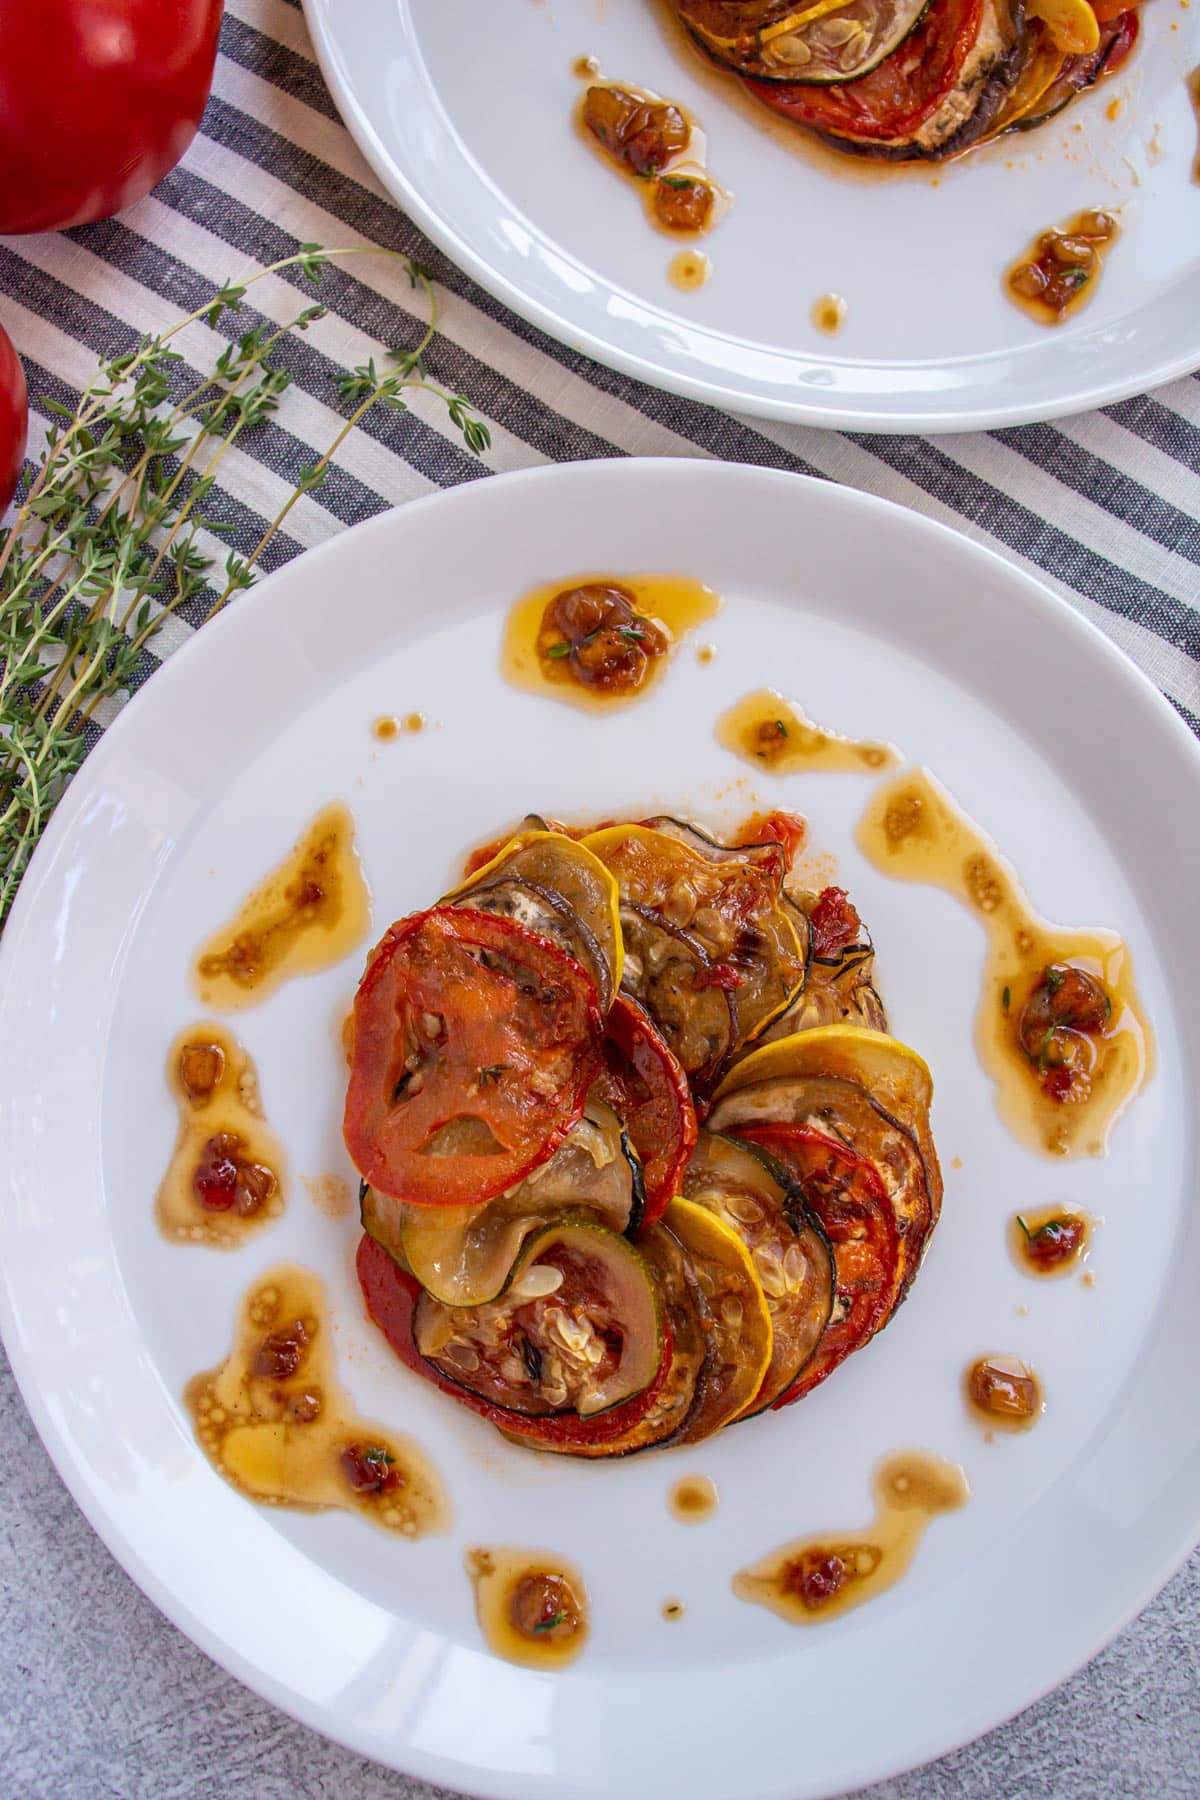 Thomas Keller's ratatouille made with thinly sliced vegetables fanned into a circle on a white plate.